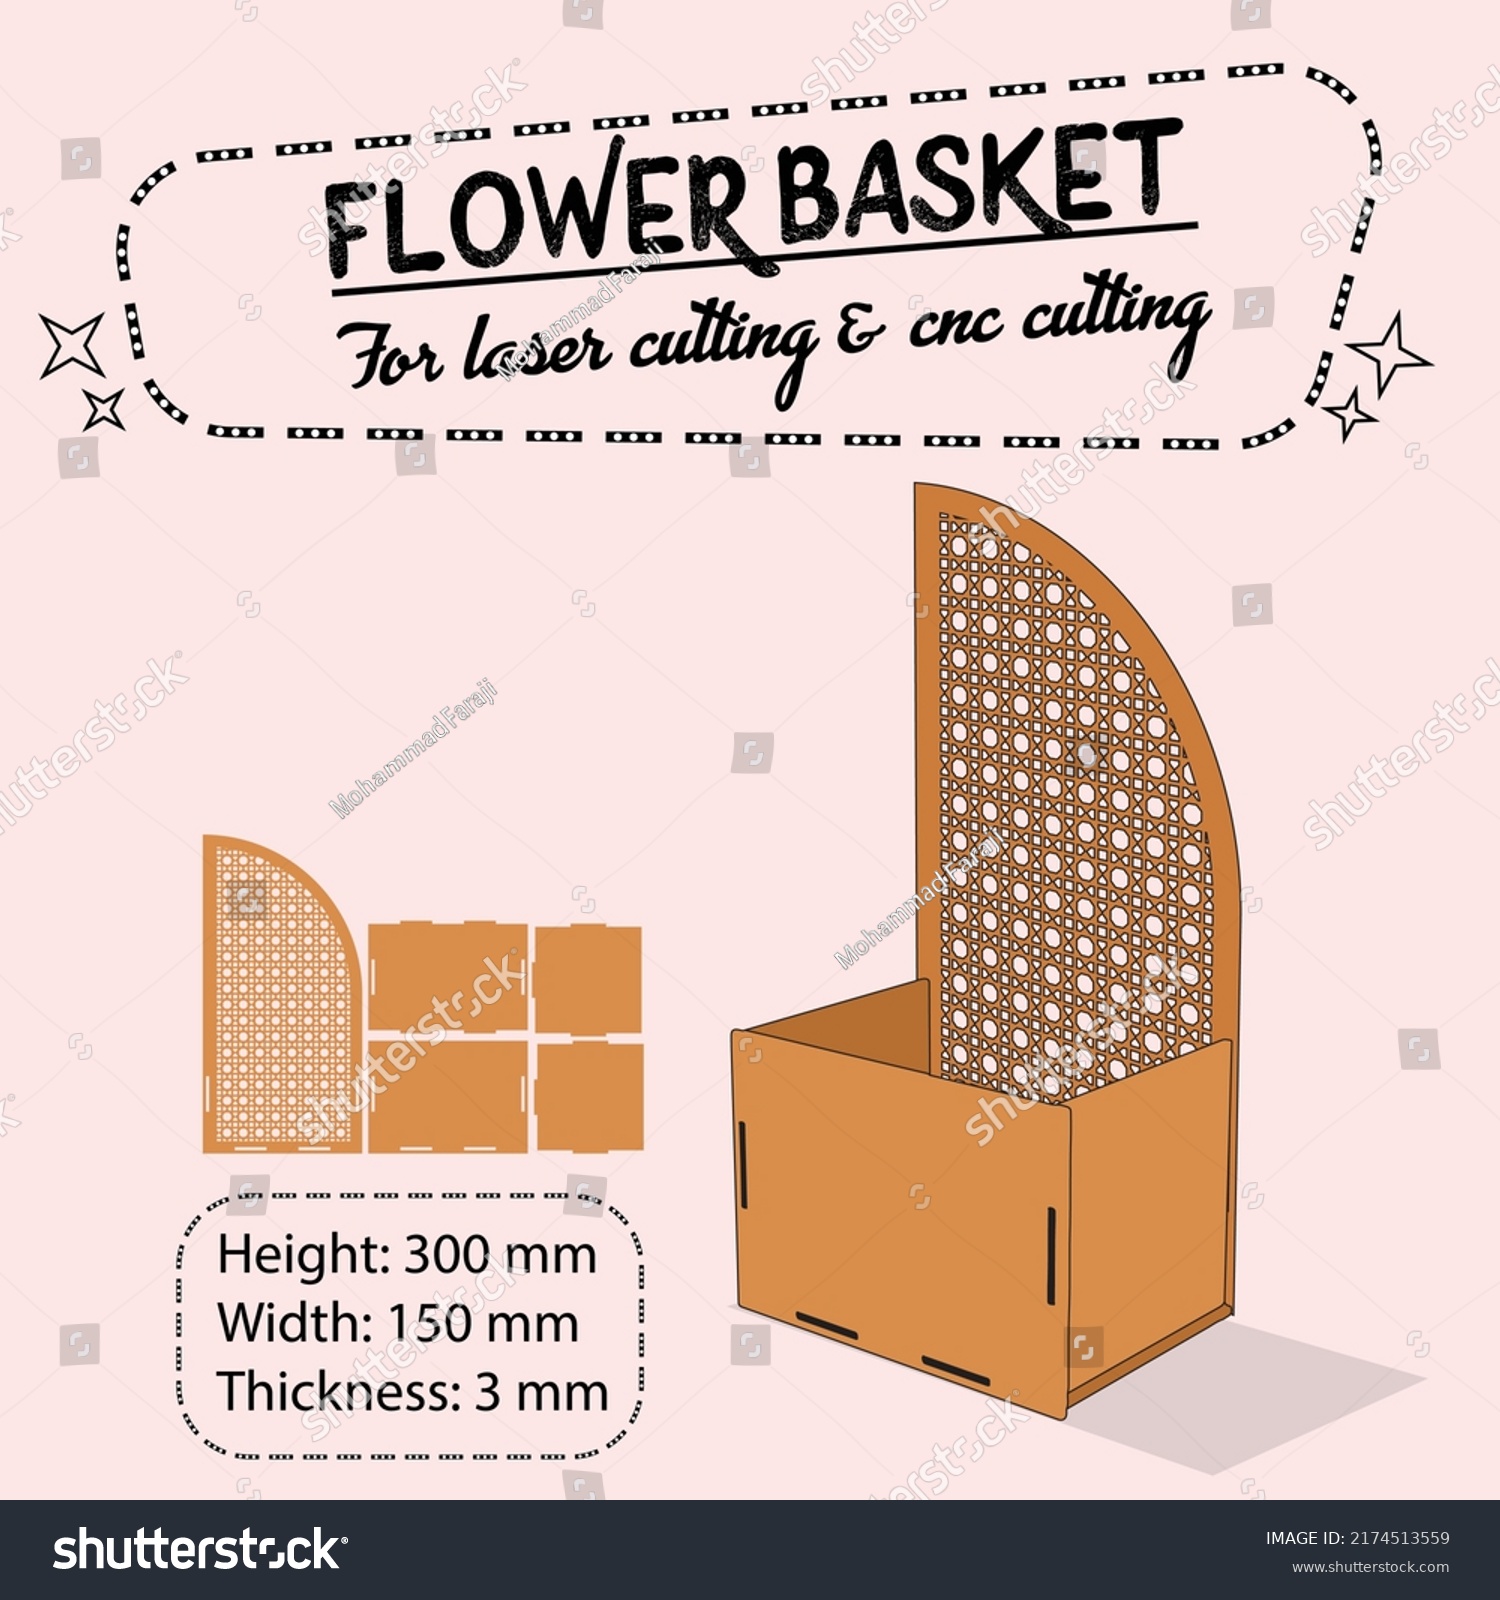 SVG of flower basket for laser cutting and cnc cutting svg